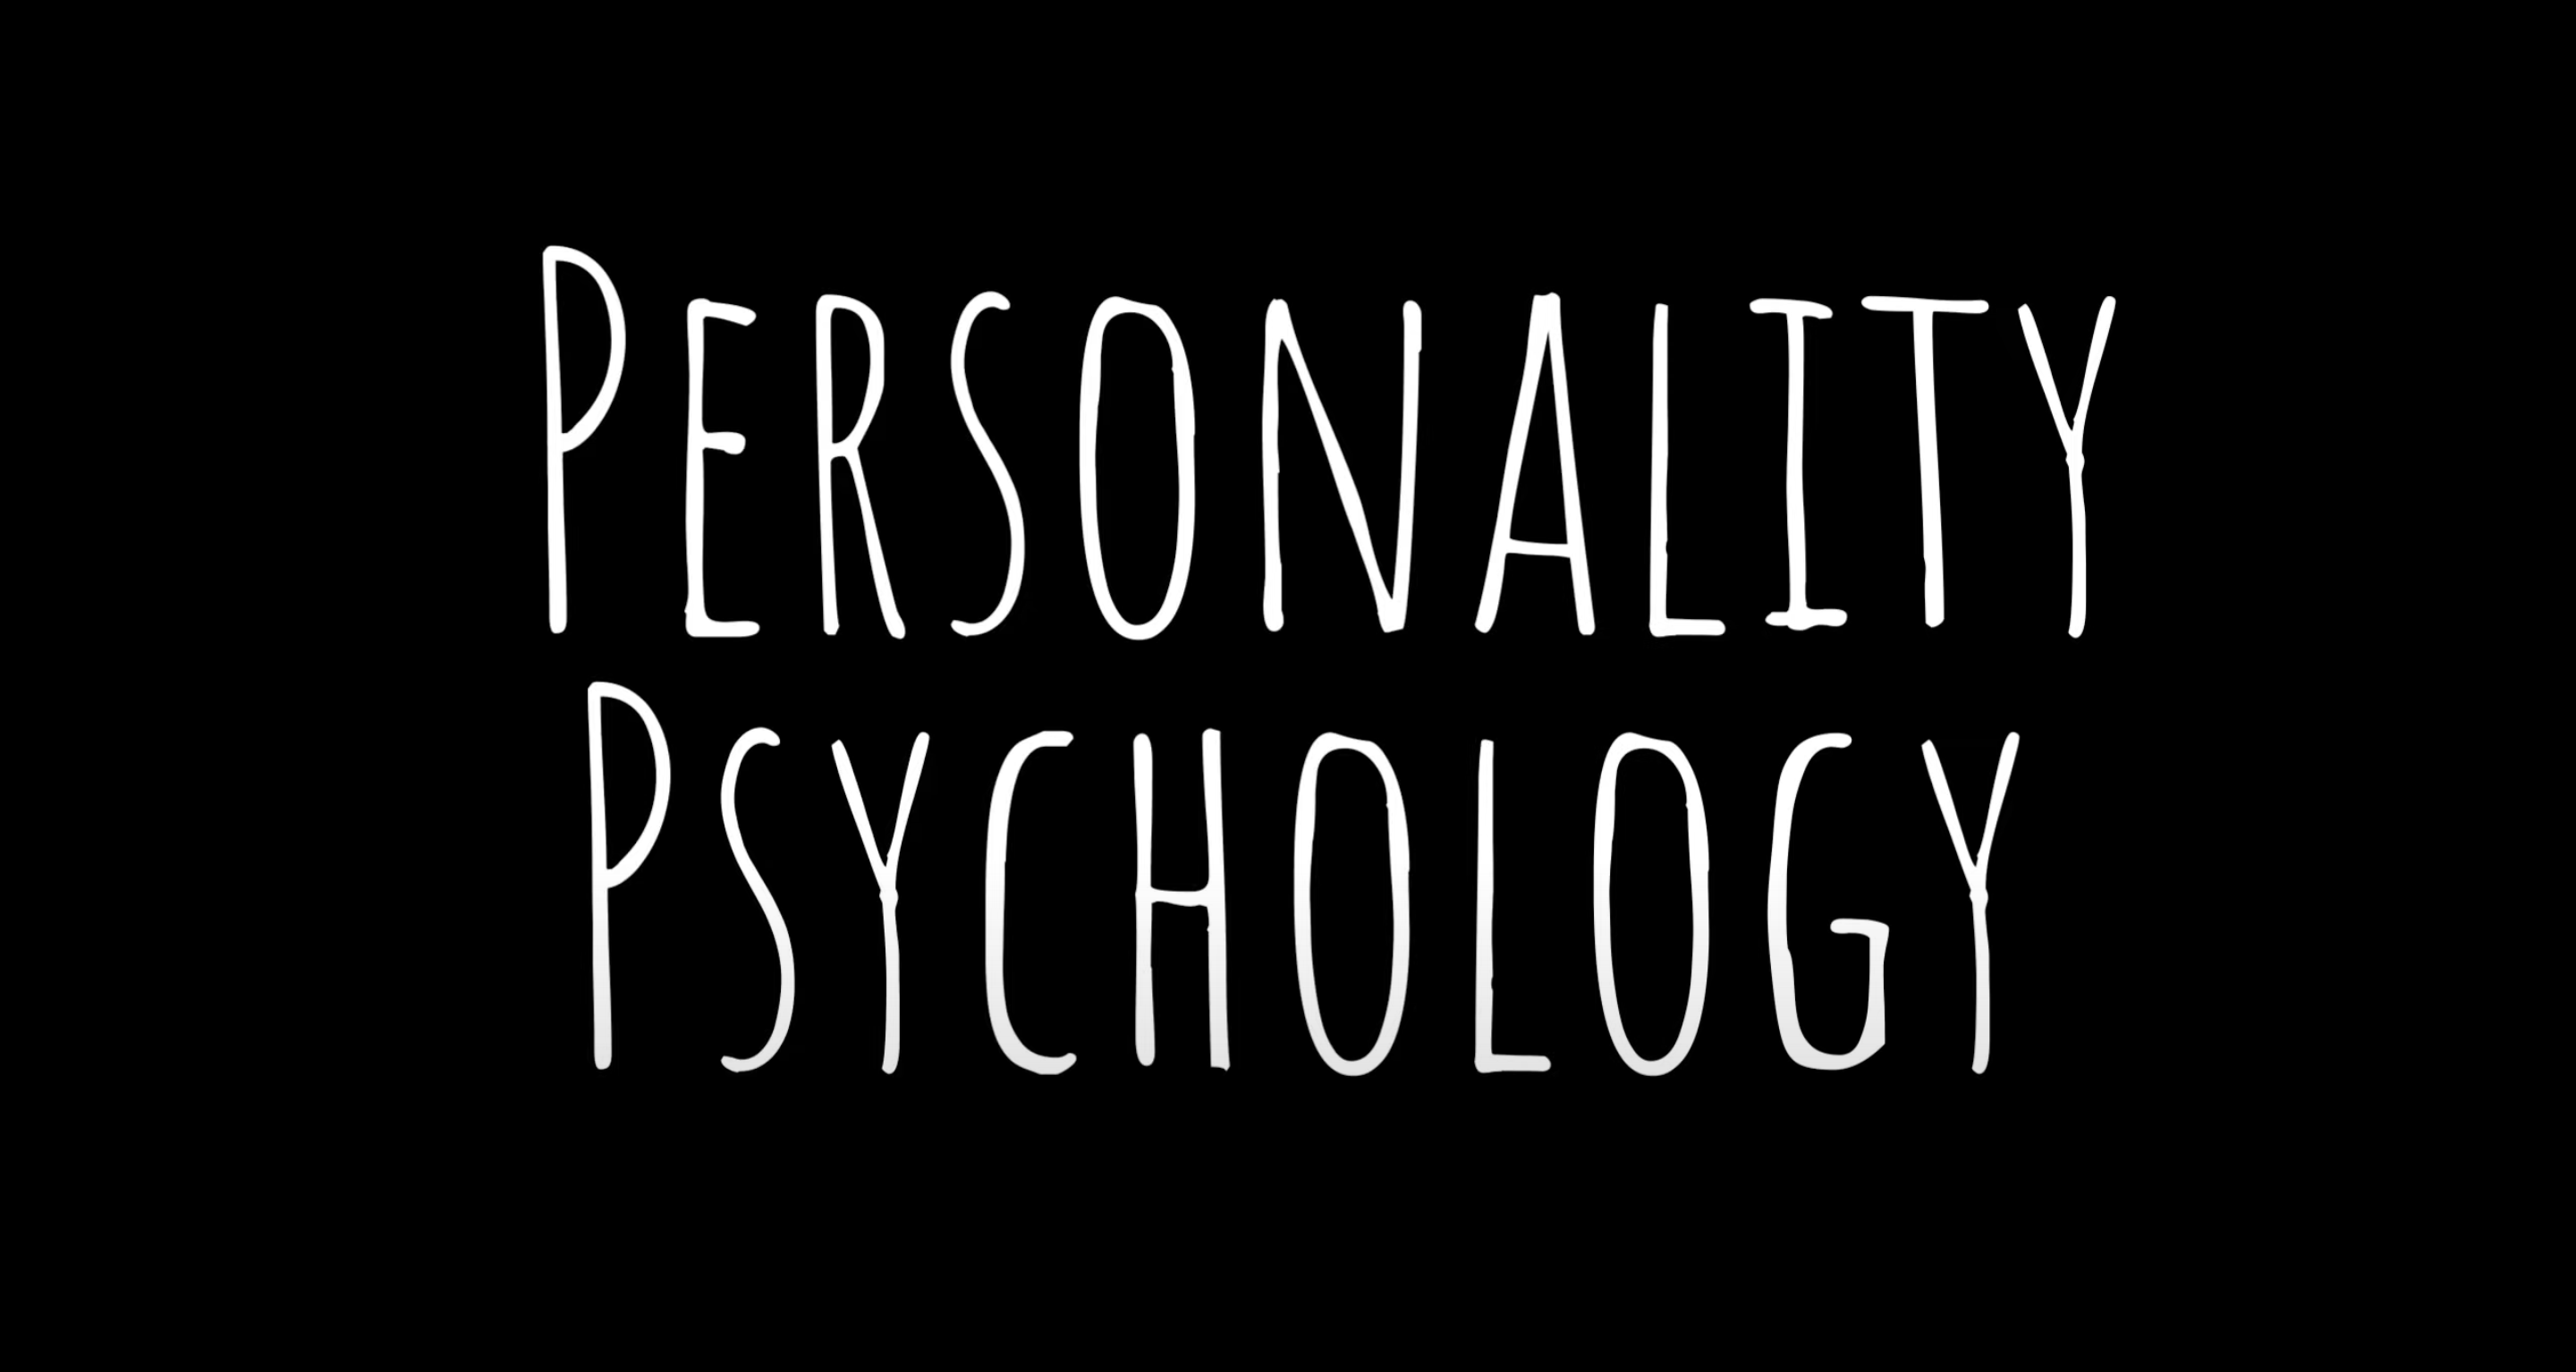 Personality Psychology is an undergraduate level course at Wake Forest University.